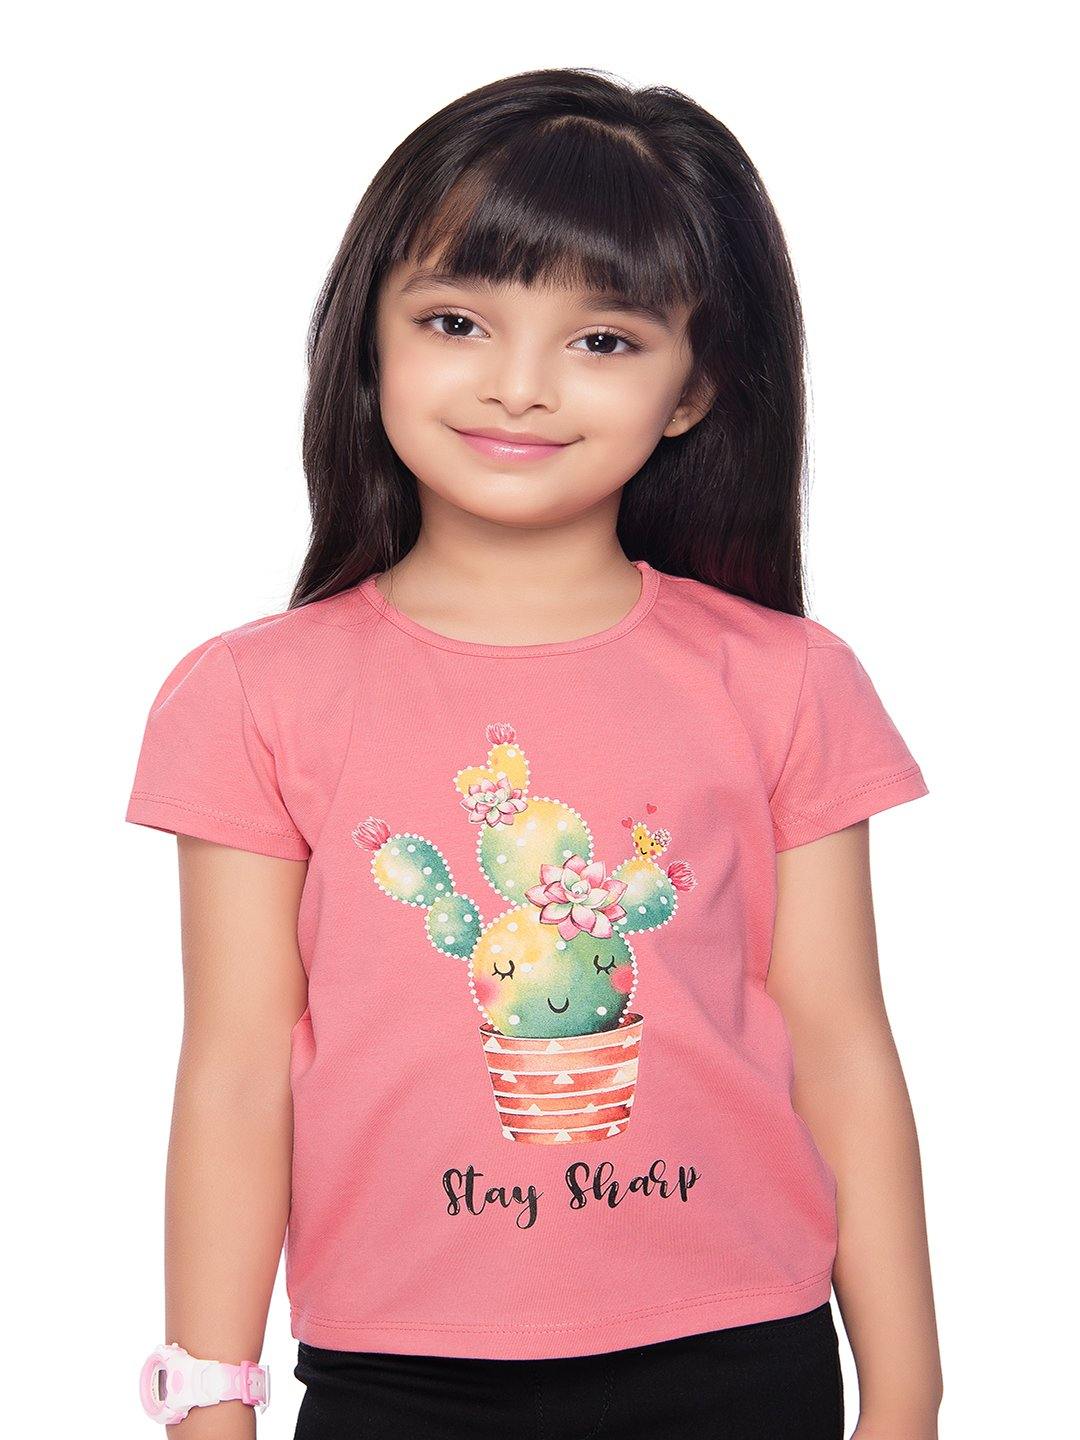 Tiny Baby Peach Colored Top - T-110 Peach - TINY BABY INDIA shop.tinybaby.in